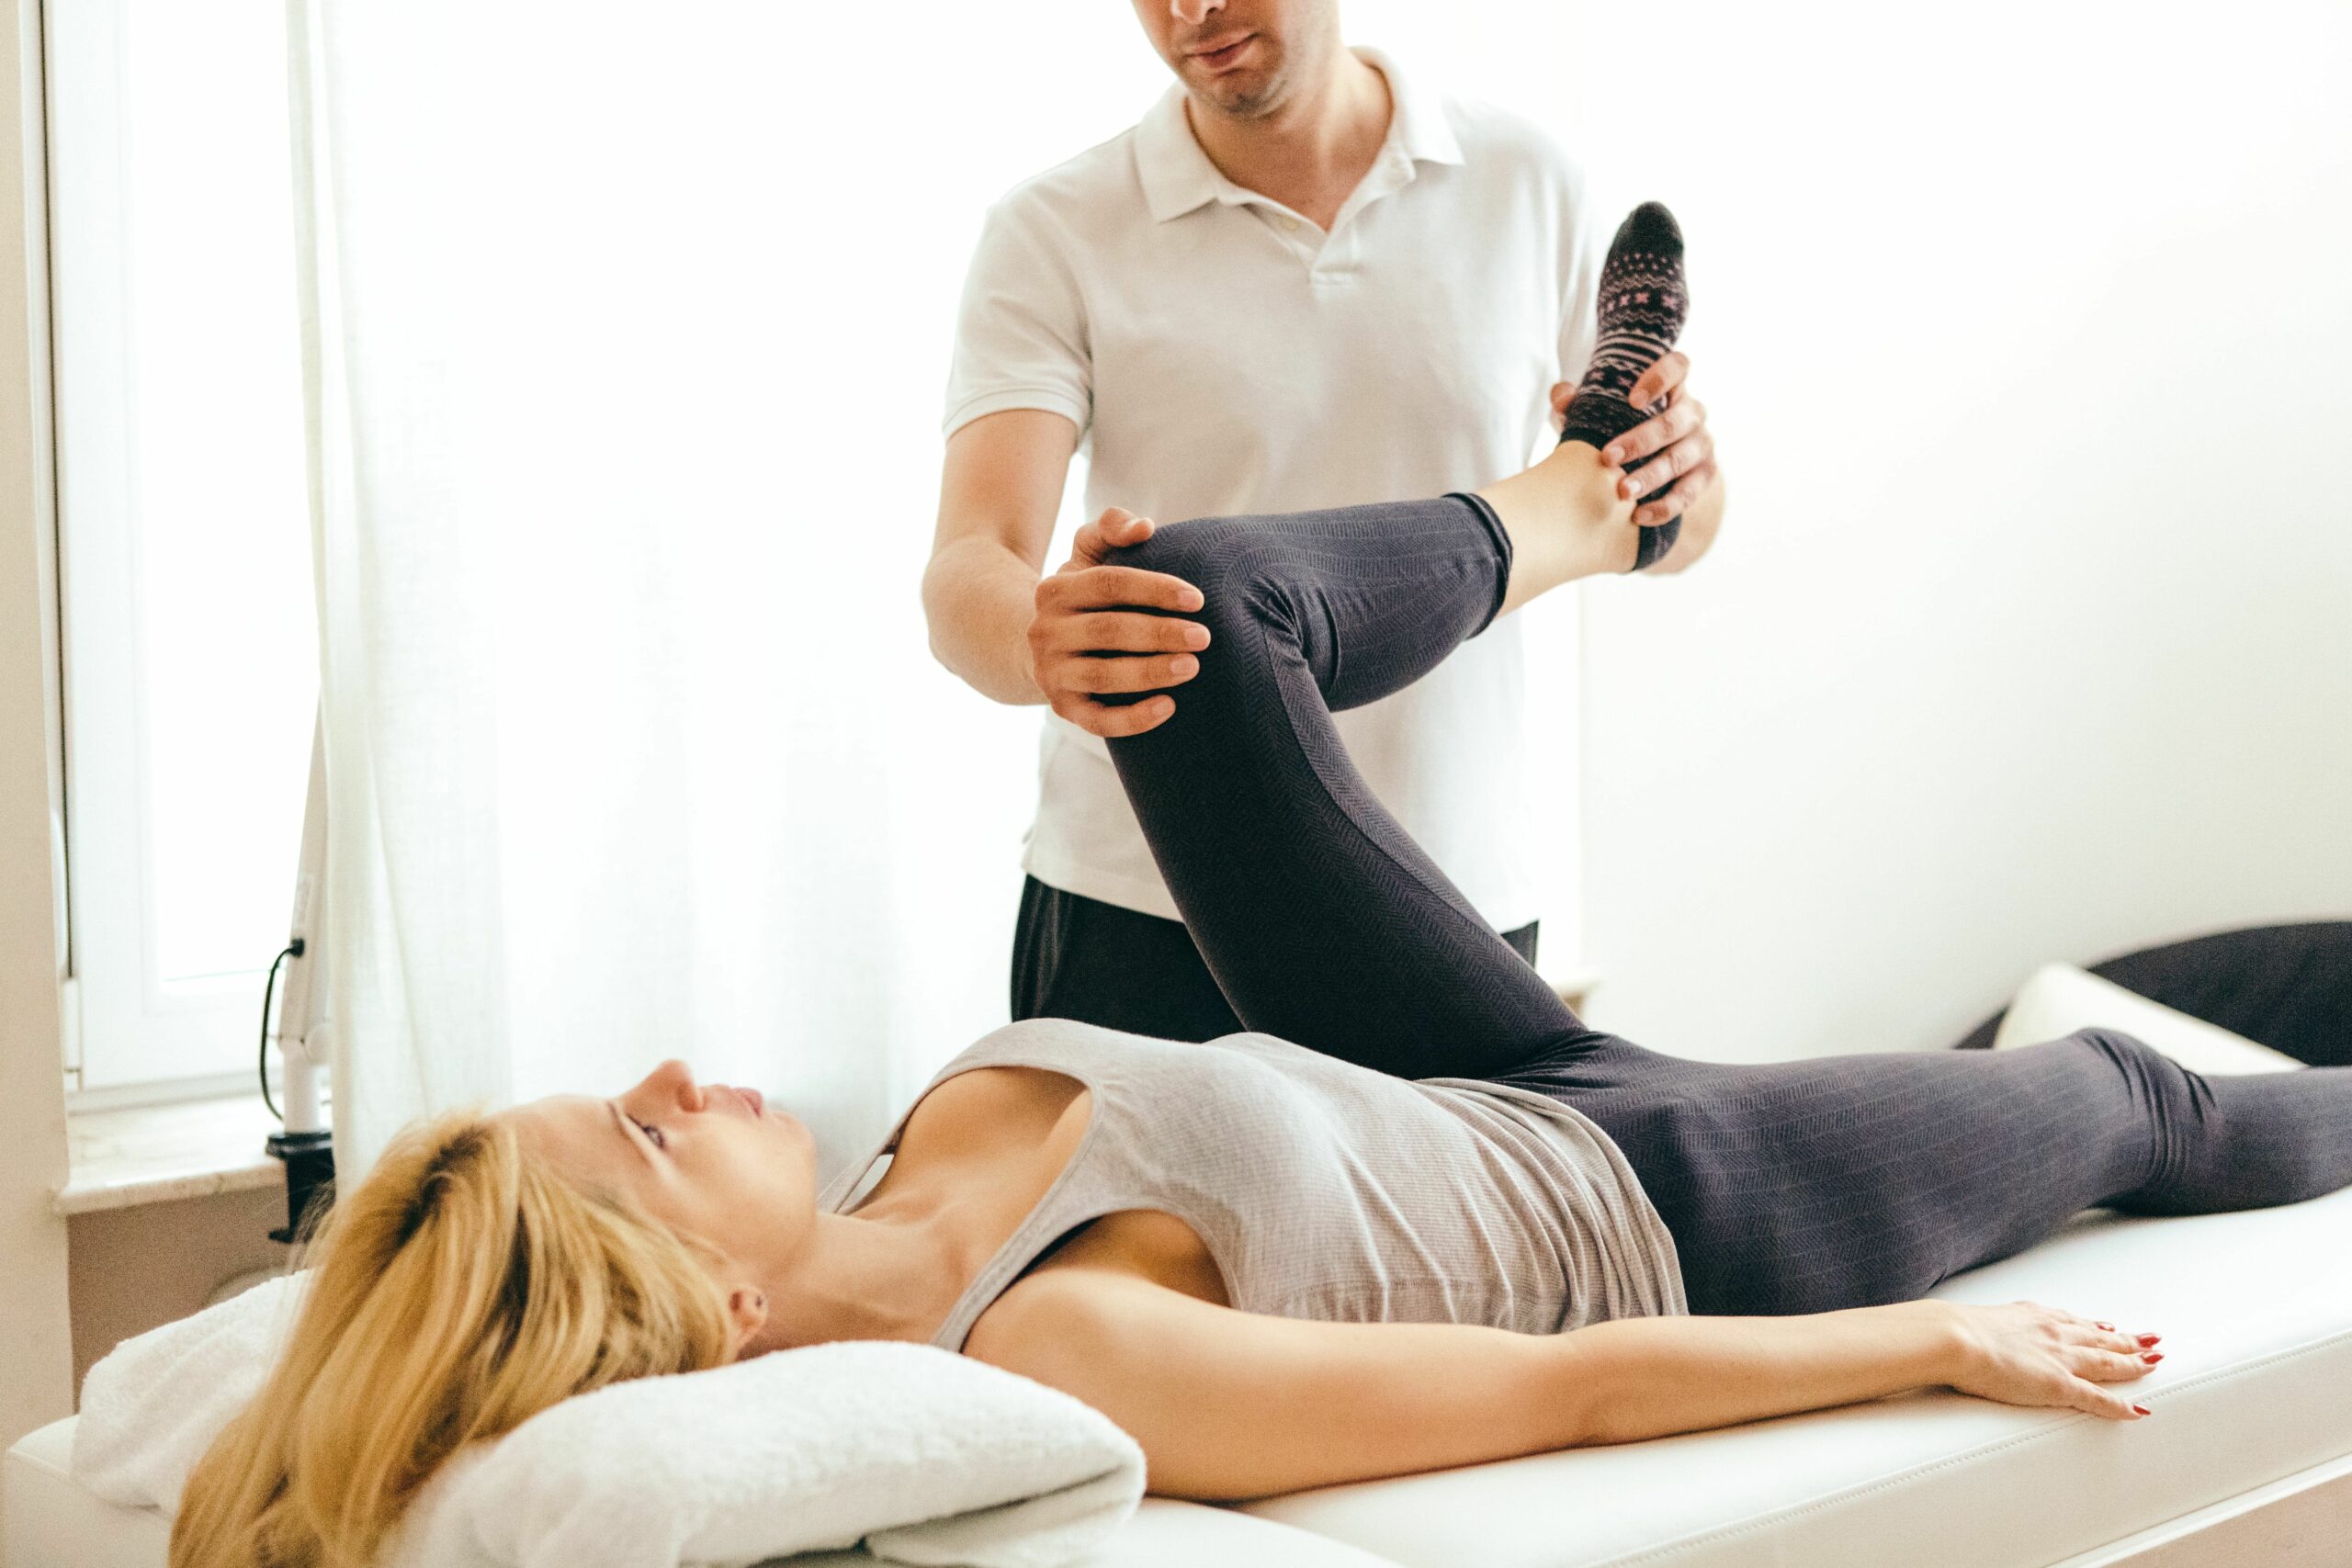 Sports Massage Therapy: How it Can Benefit Athletes